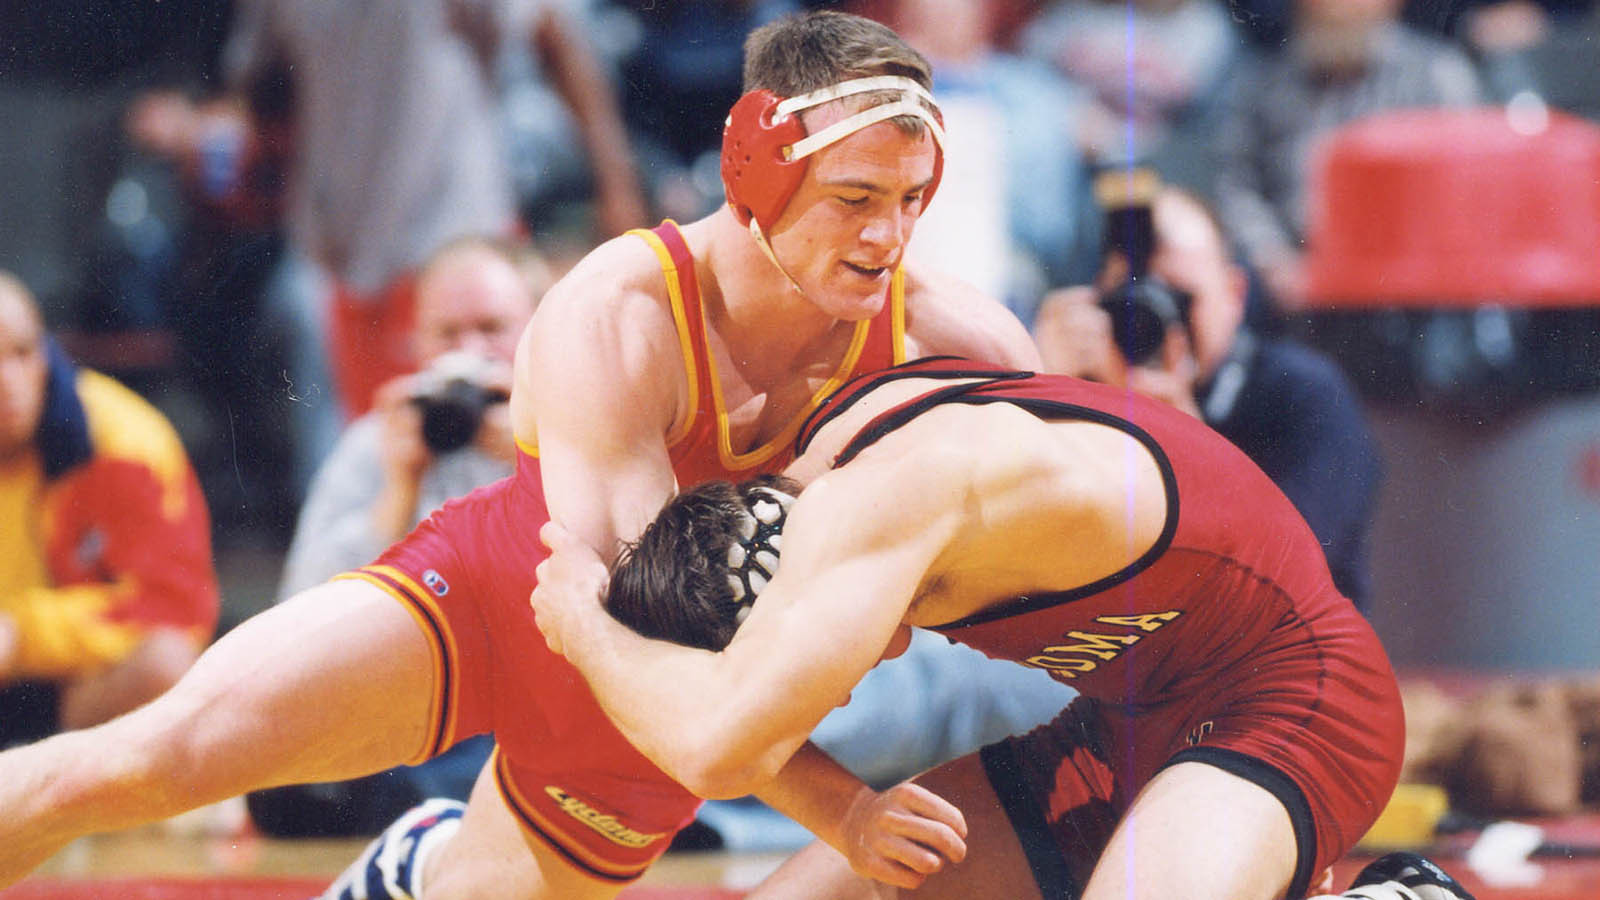 Best College Wrestlers of All Time